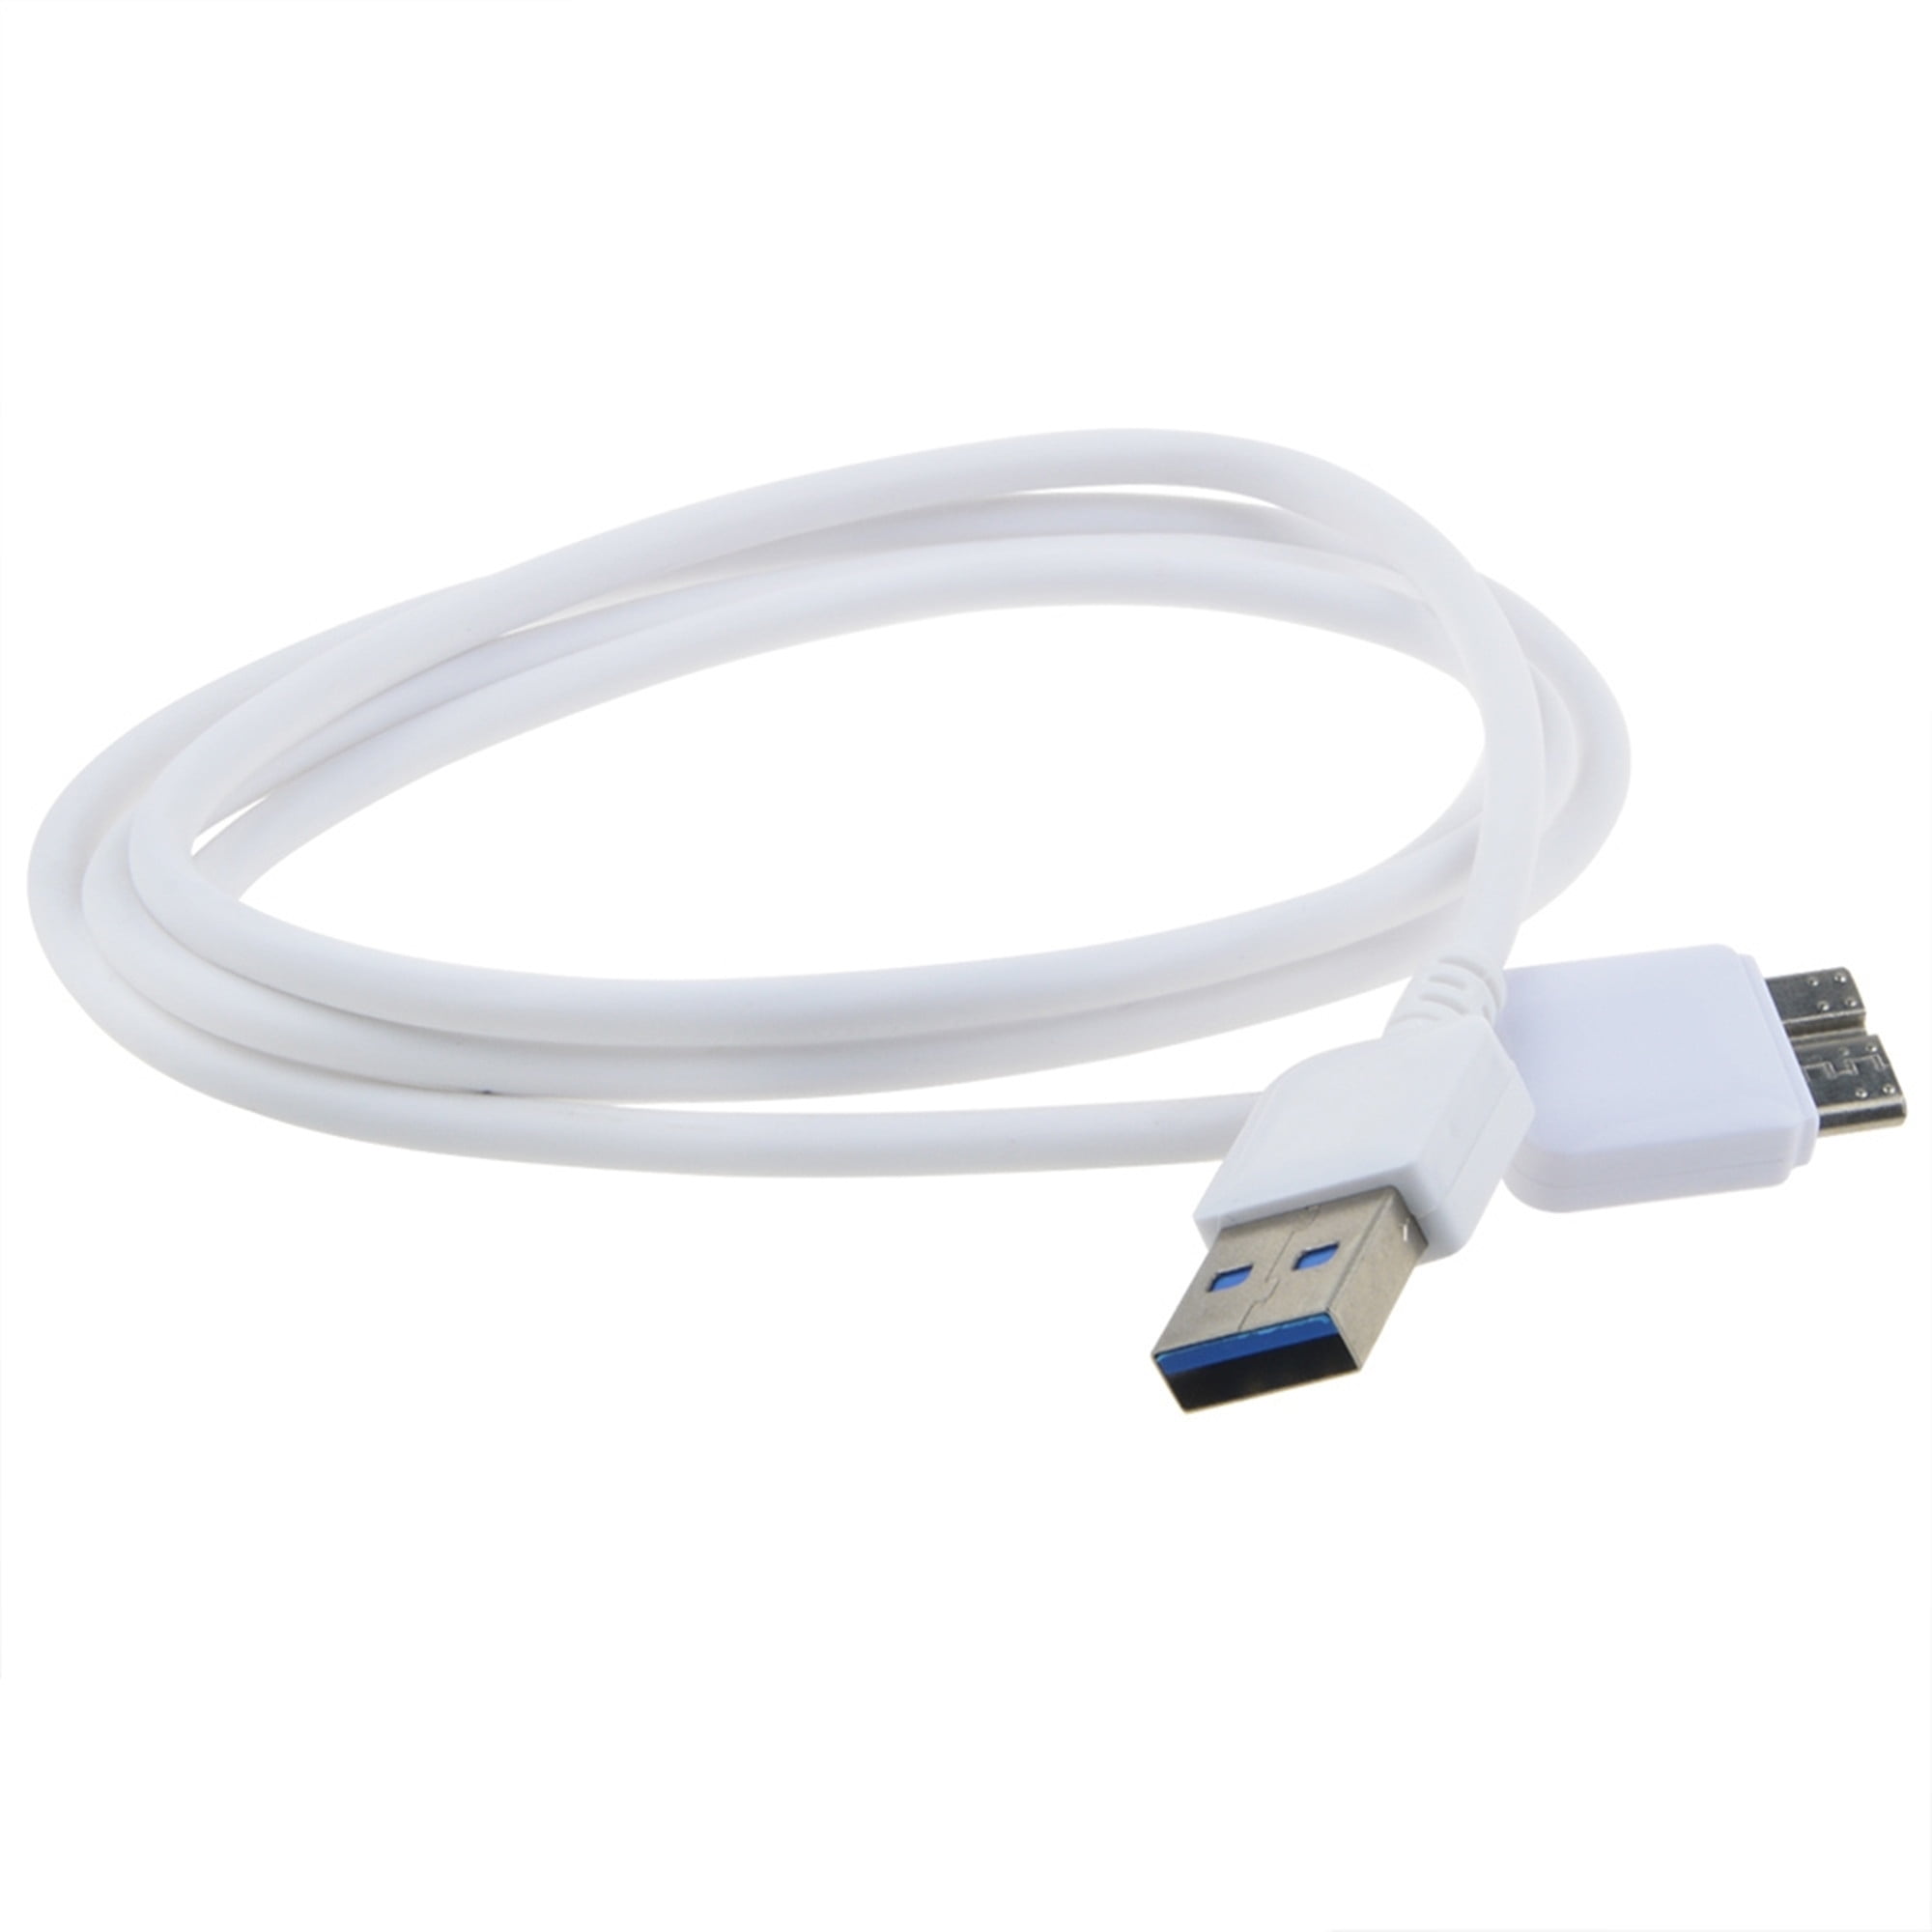 3ft USB Data Sync Cable Cord for WD My Passport Portable HD 1TB WDBYNN0010BBK 